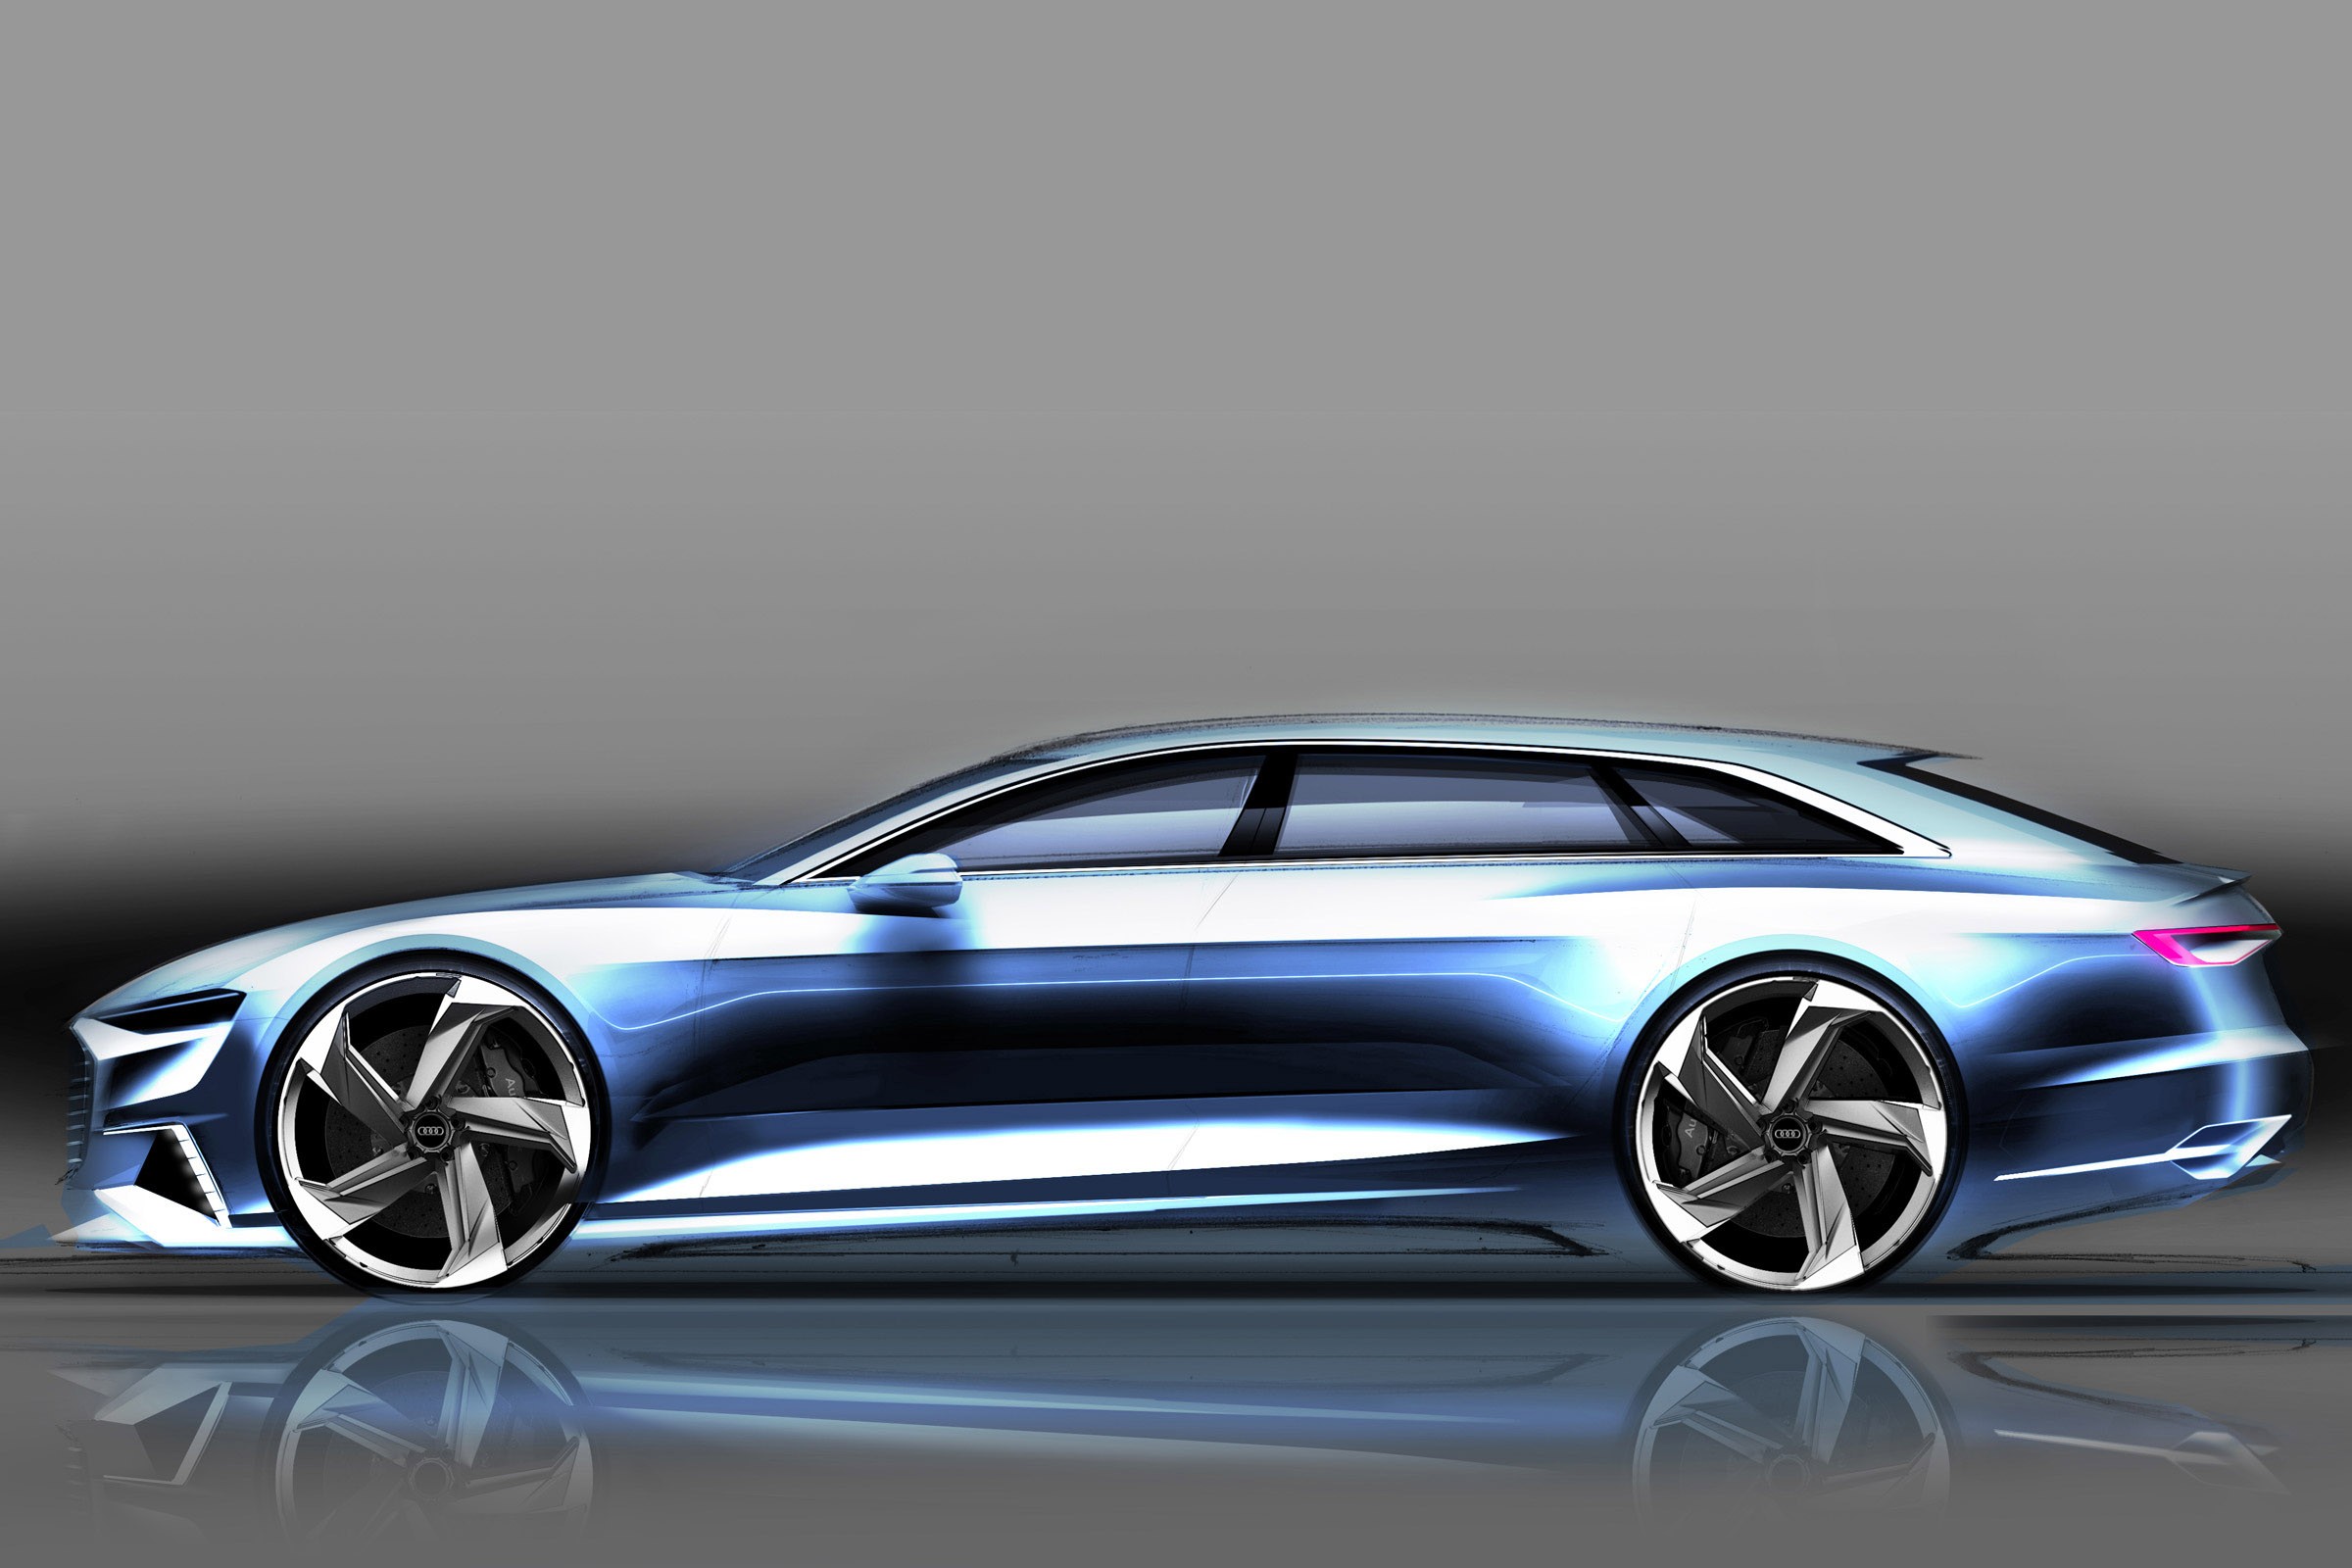 Vehicle Car Audi Audi Prologue Sketches Concept Cars Reflection Simple Background Station Wagon Side 2400x1600